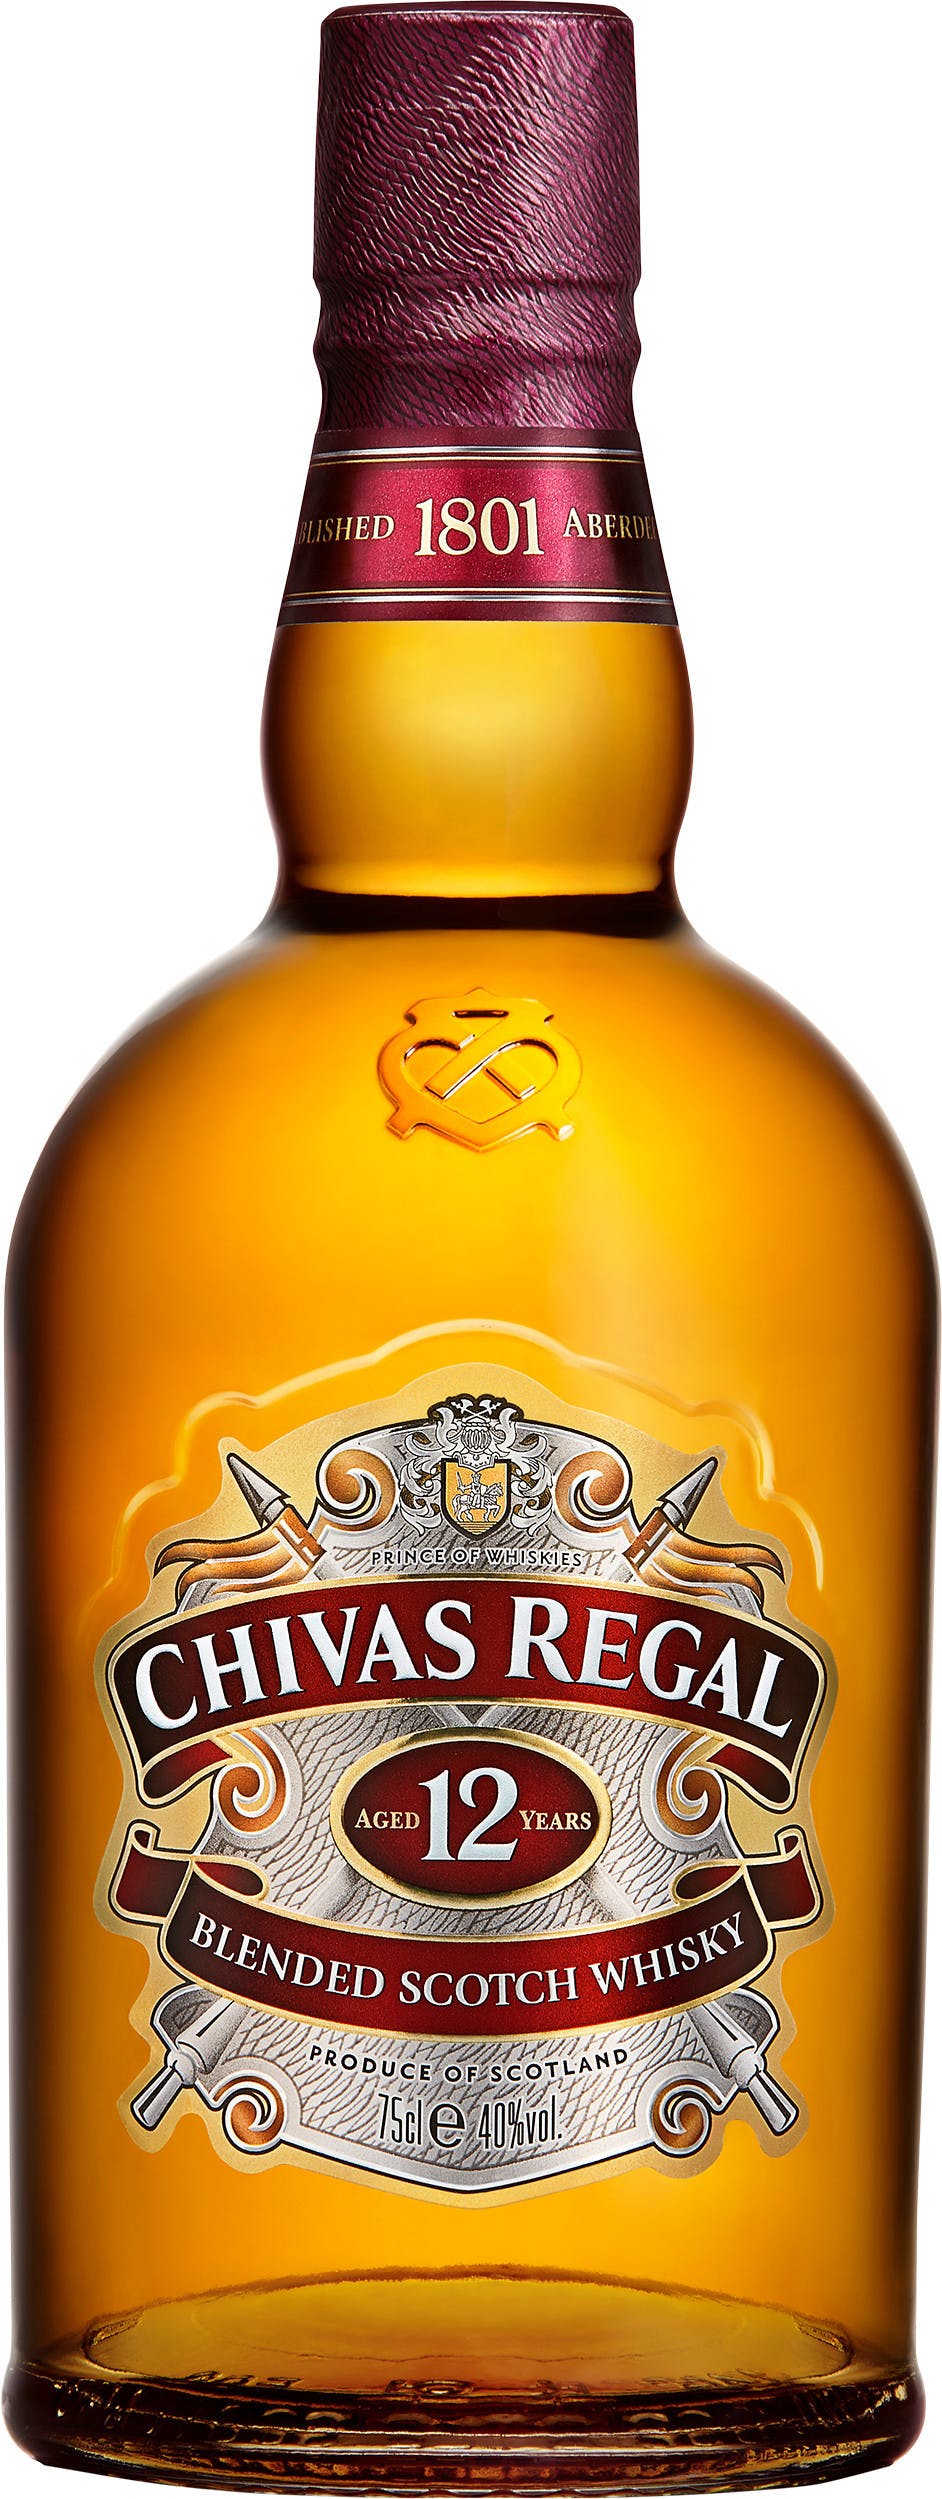 - Whisky Chivas Regal State old Liquors 750ml Scotch Discount 12 year Blended Garden